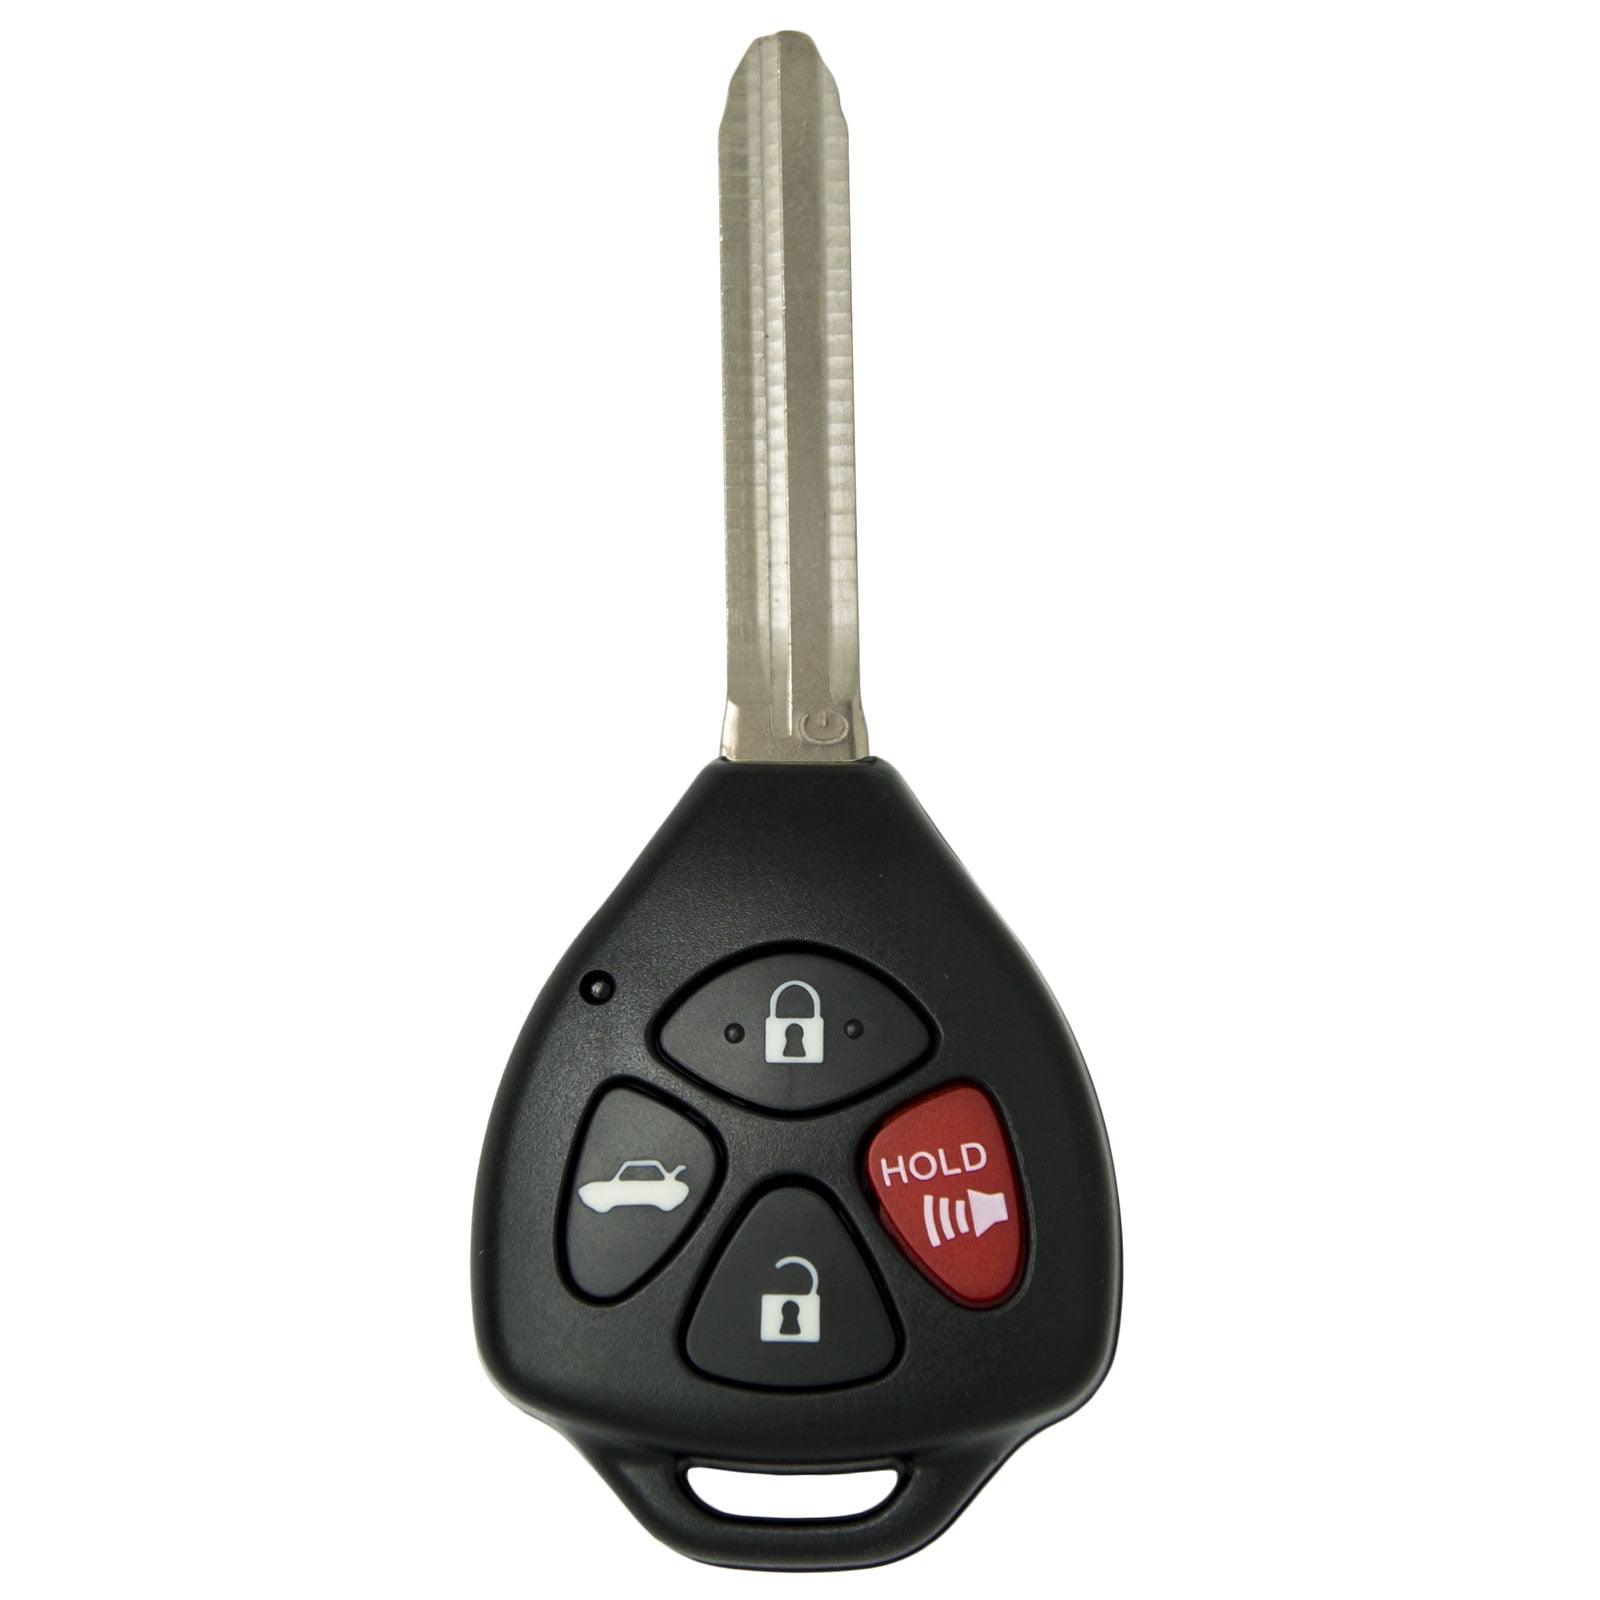 CanadaAutomotiveSupply /© 2 New Replacement Uncut Keyless Fobik Key Fobs for Select Chrysler Dodge With FREE DIY Programming Guide